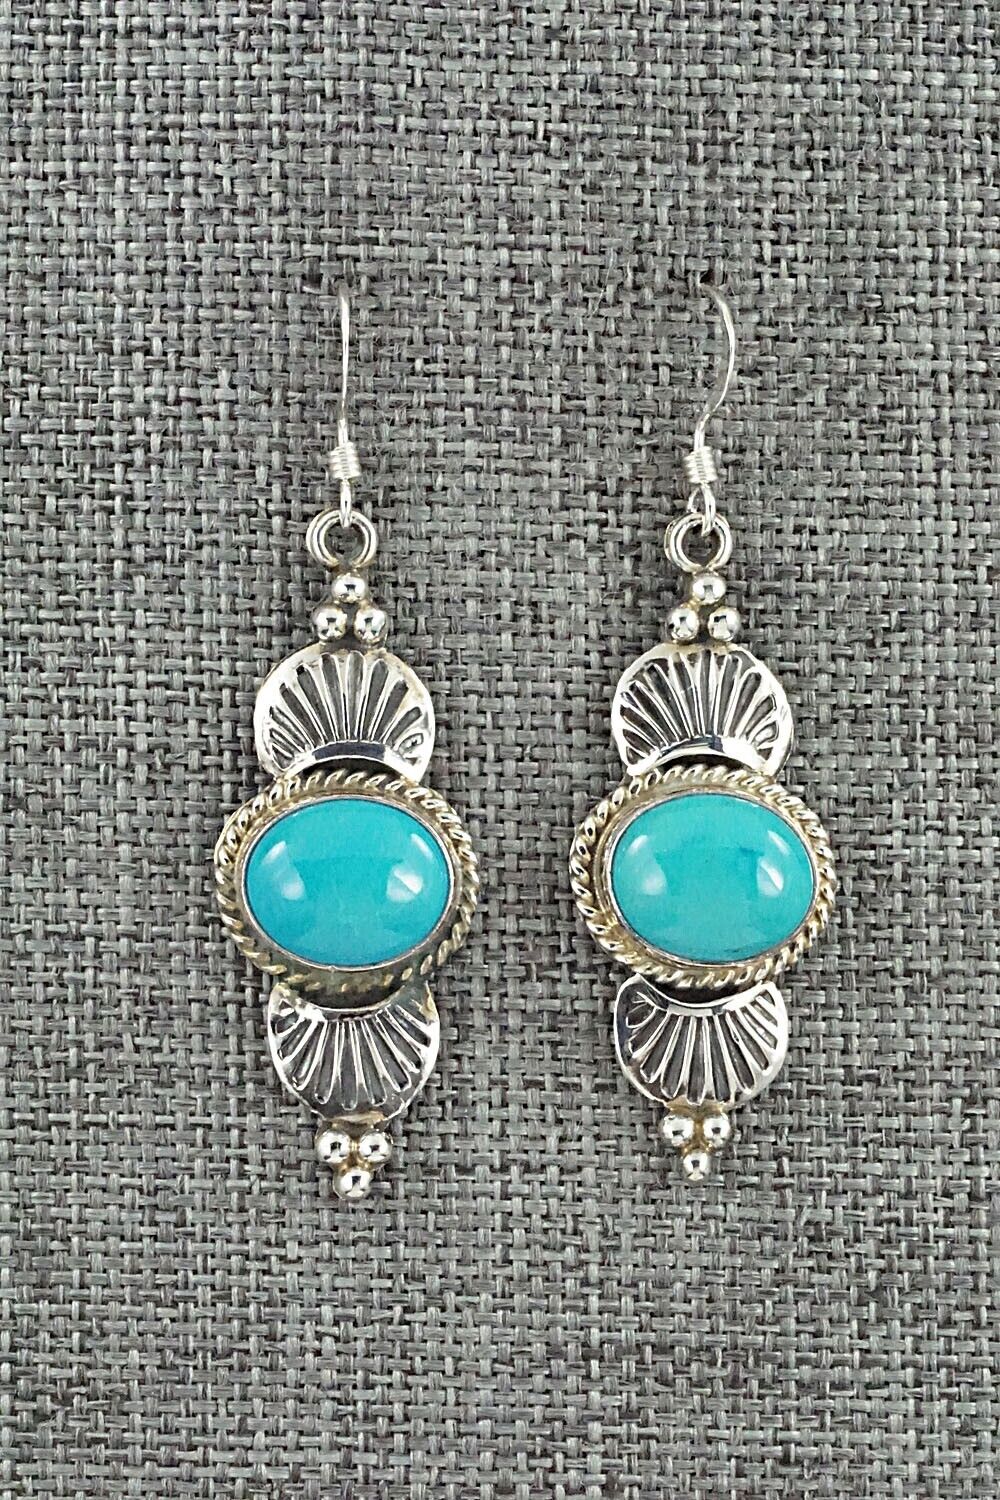 Turquoise & Sterling Silver Earrings - Michael Calladitto